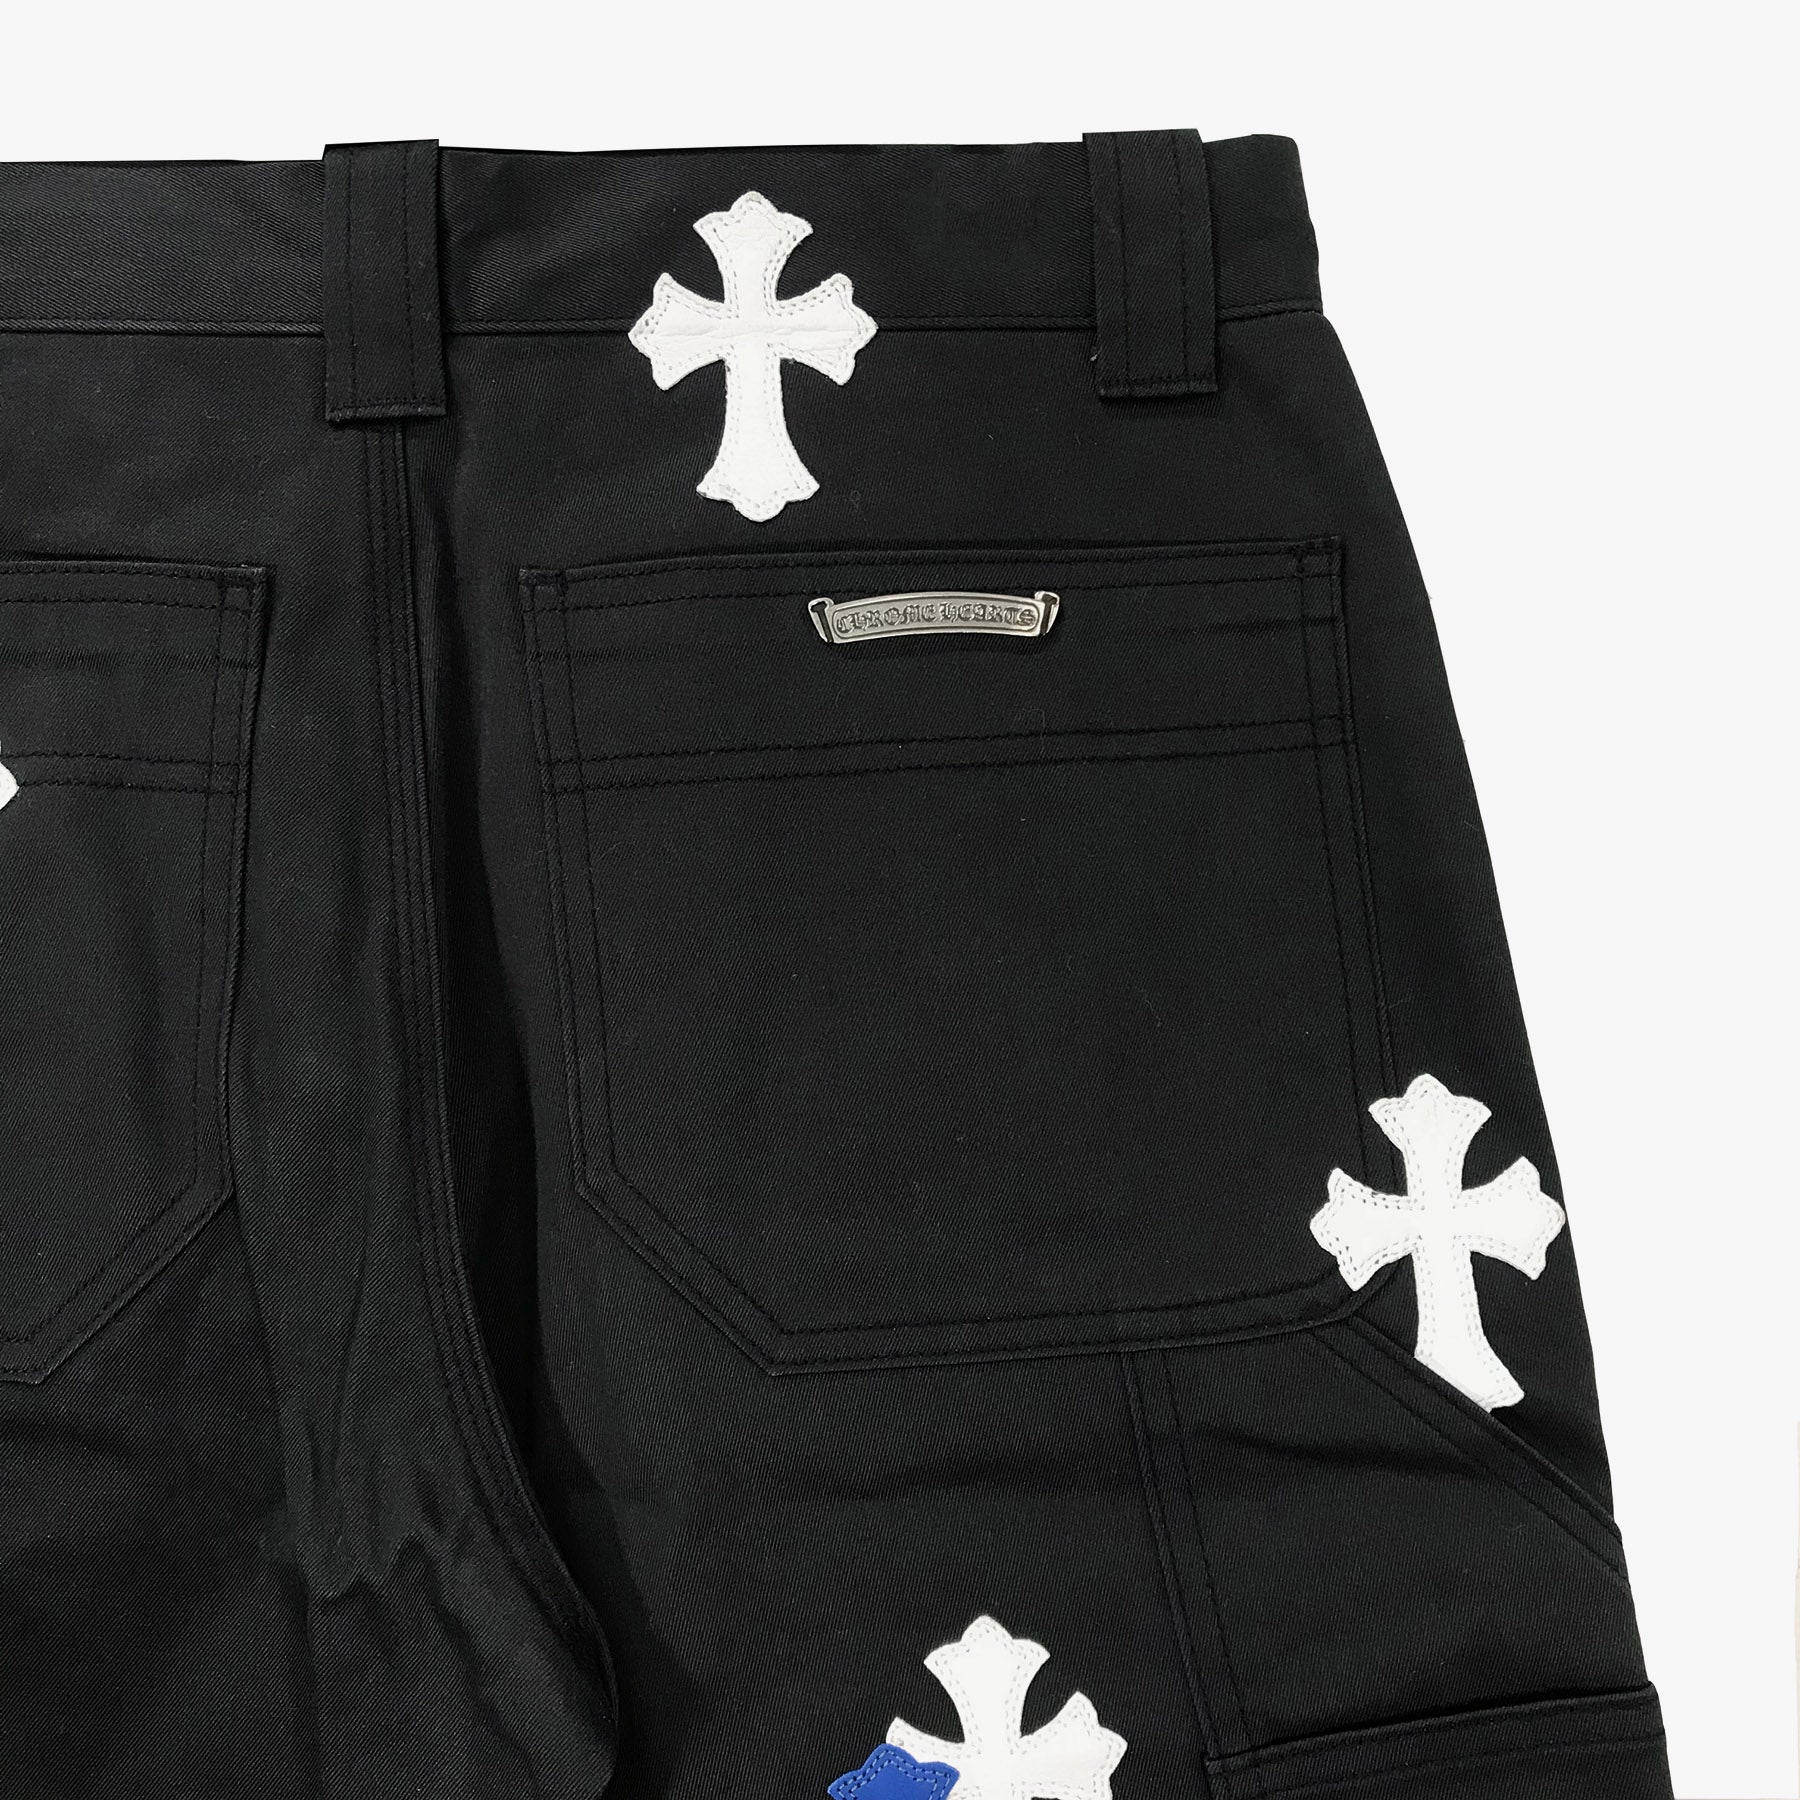 Chrome Hearts White & Blue Leather Cross Patches Jeans - SHENGLI ROAD MARKET